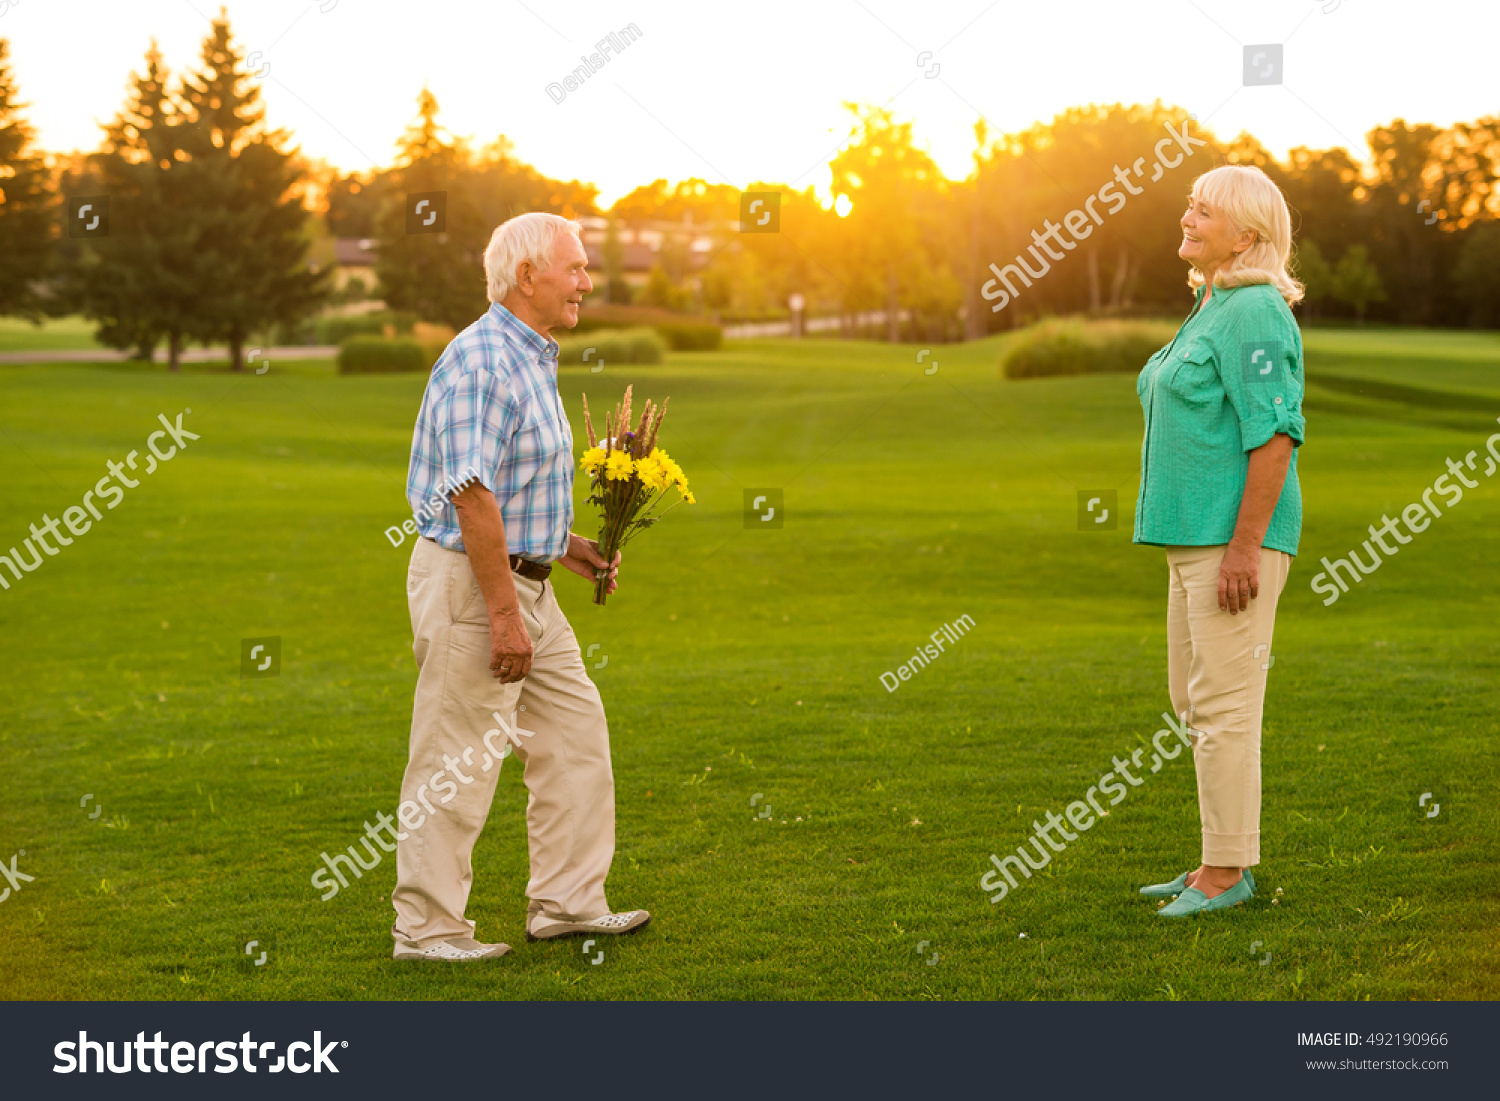 Senior man with a bouquet. Couple on a meadow. Let me congratulate you. Fifty years together. #492190966